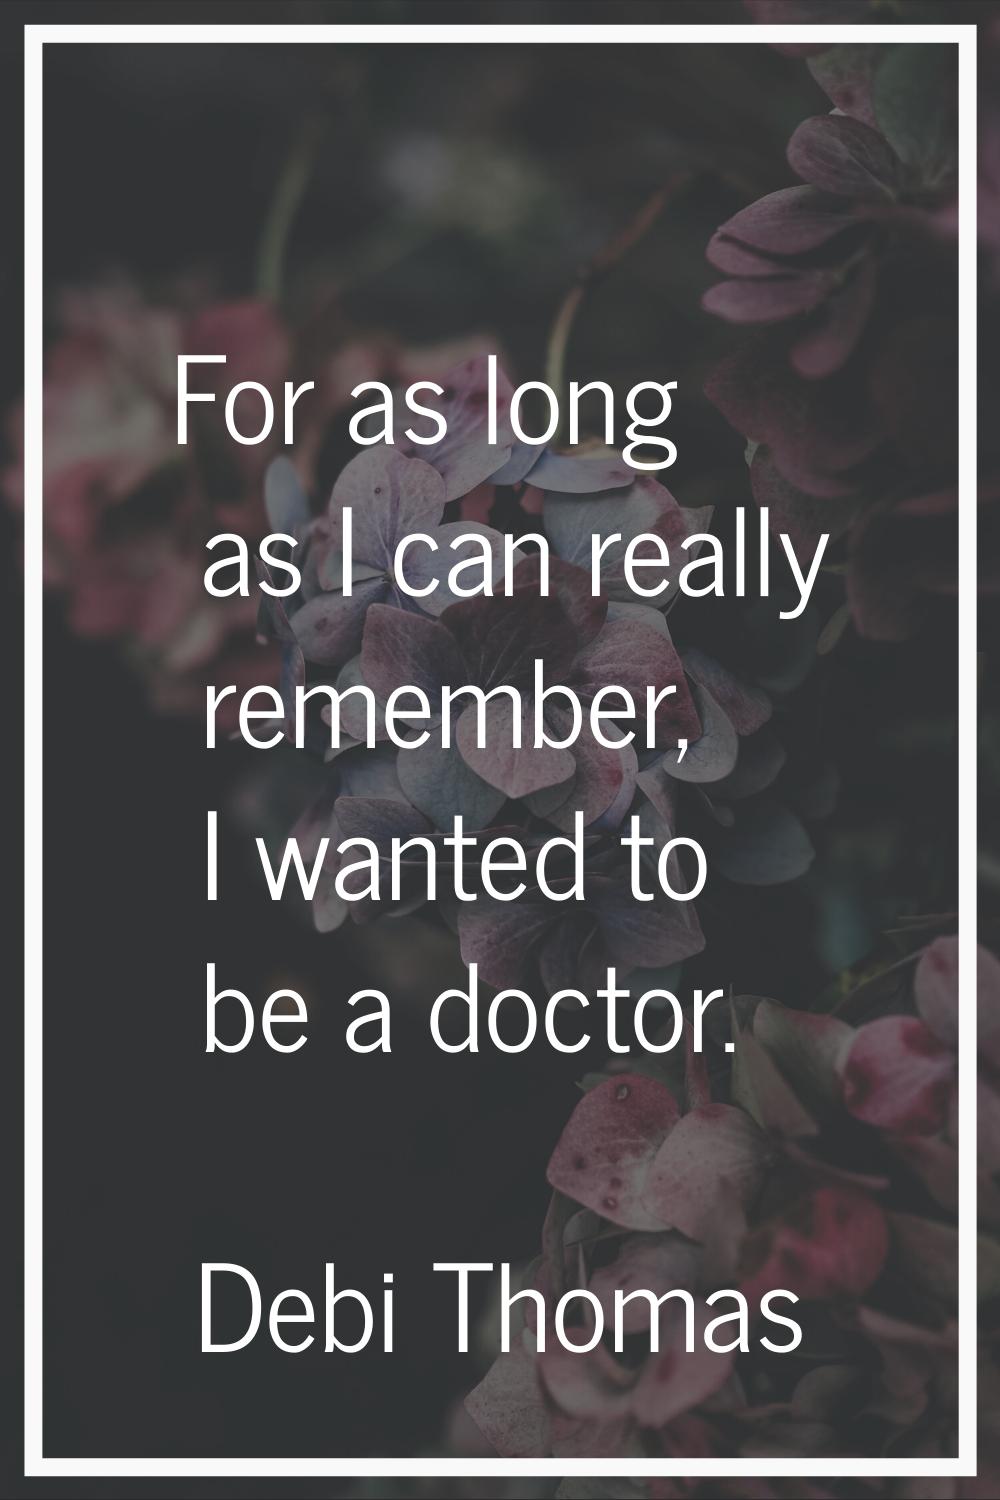 For as long as I can really remember, I wanted to be a doctor.